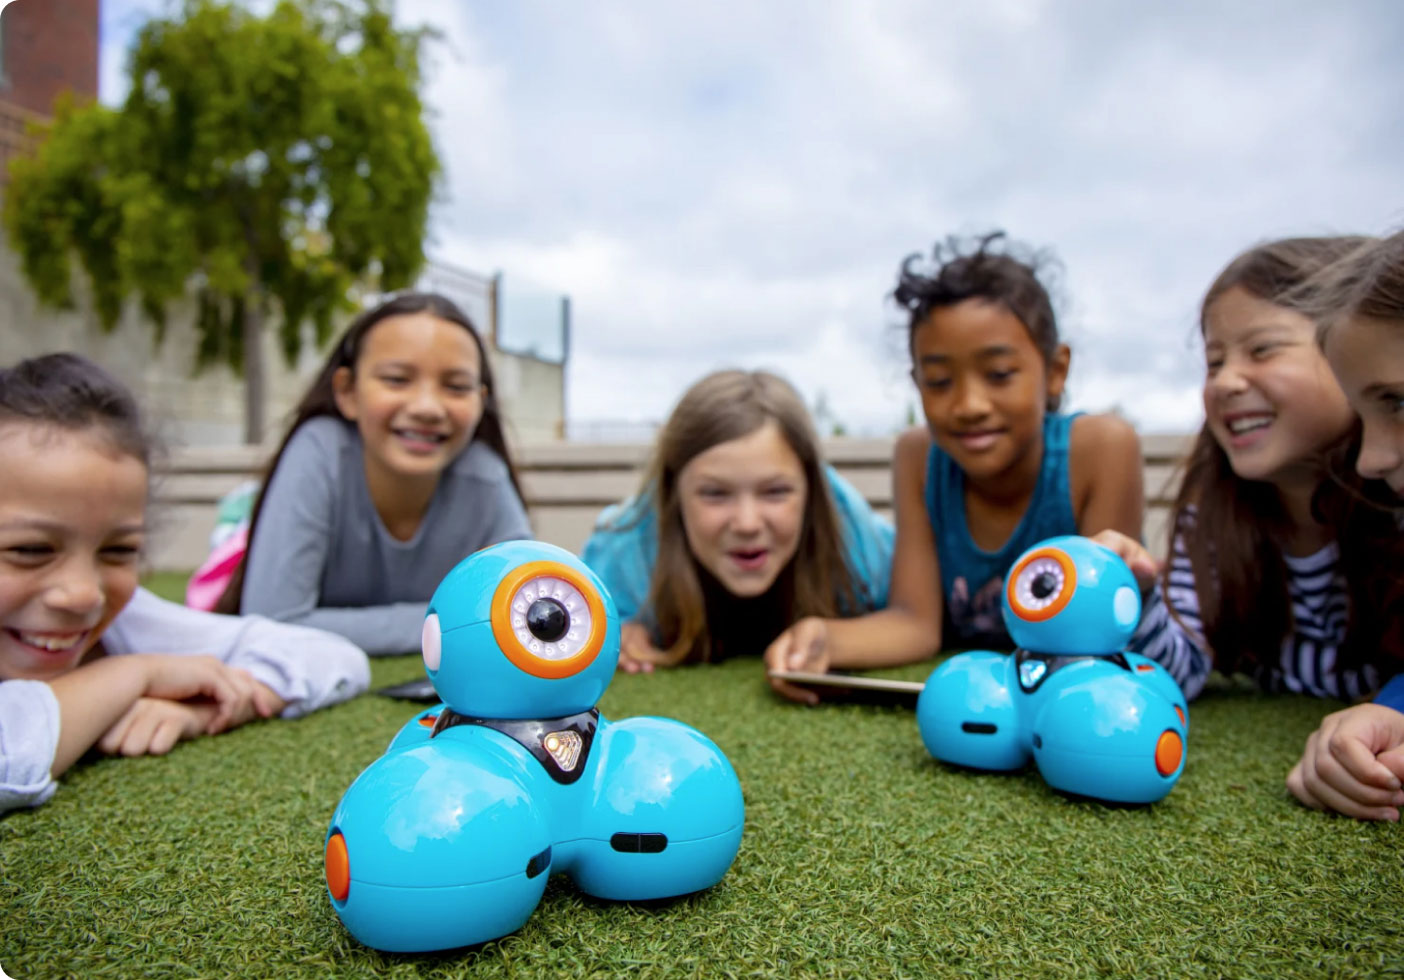 Getting Started with Dash & Dot